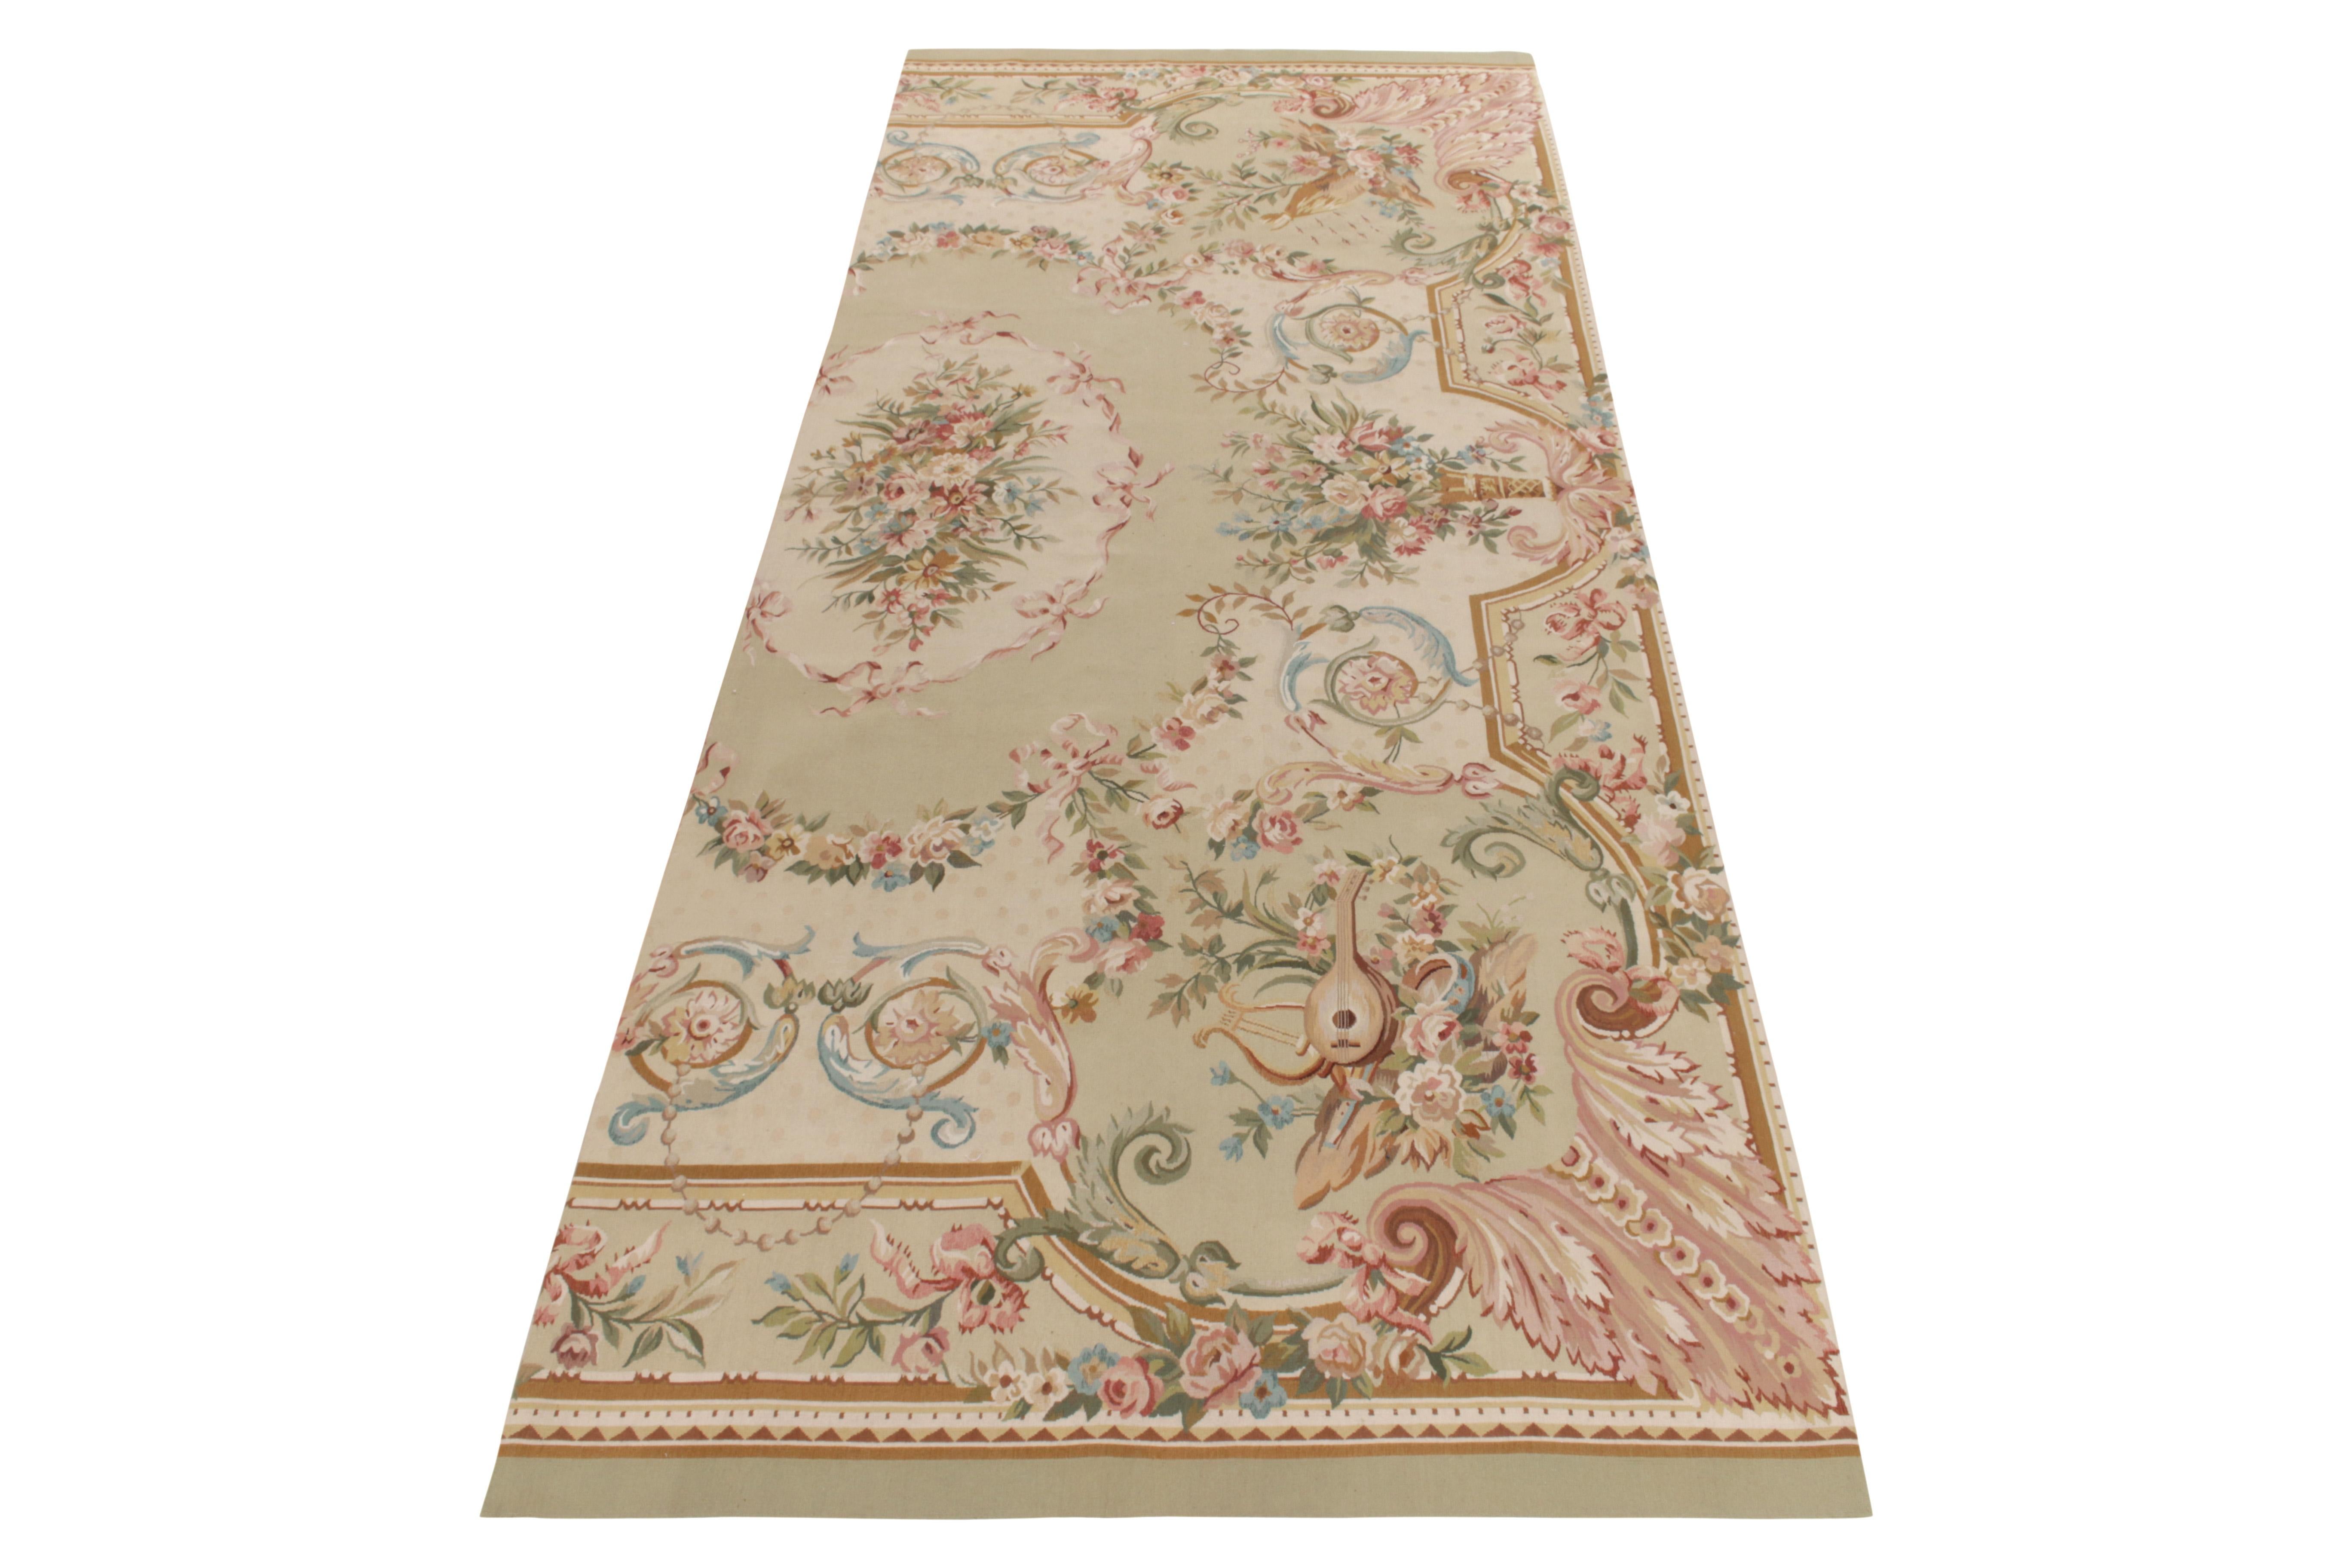 Handwoven in fine wool yarn, a 5x12 Aubusson flat weave style rug fragment from the European Collection by Rug & Kilim. This fragment piece revels in a glorious floral pattern in pastel tones of pink, blue & green with luscious beige subtly